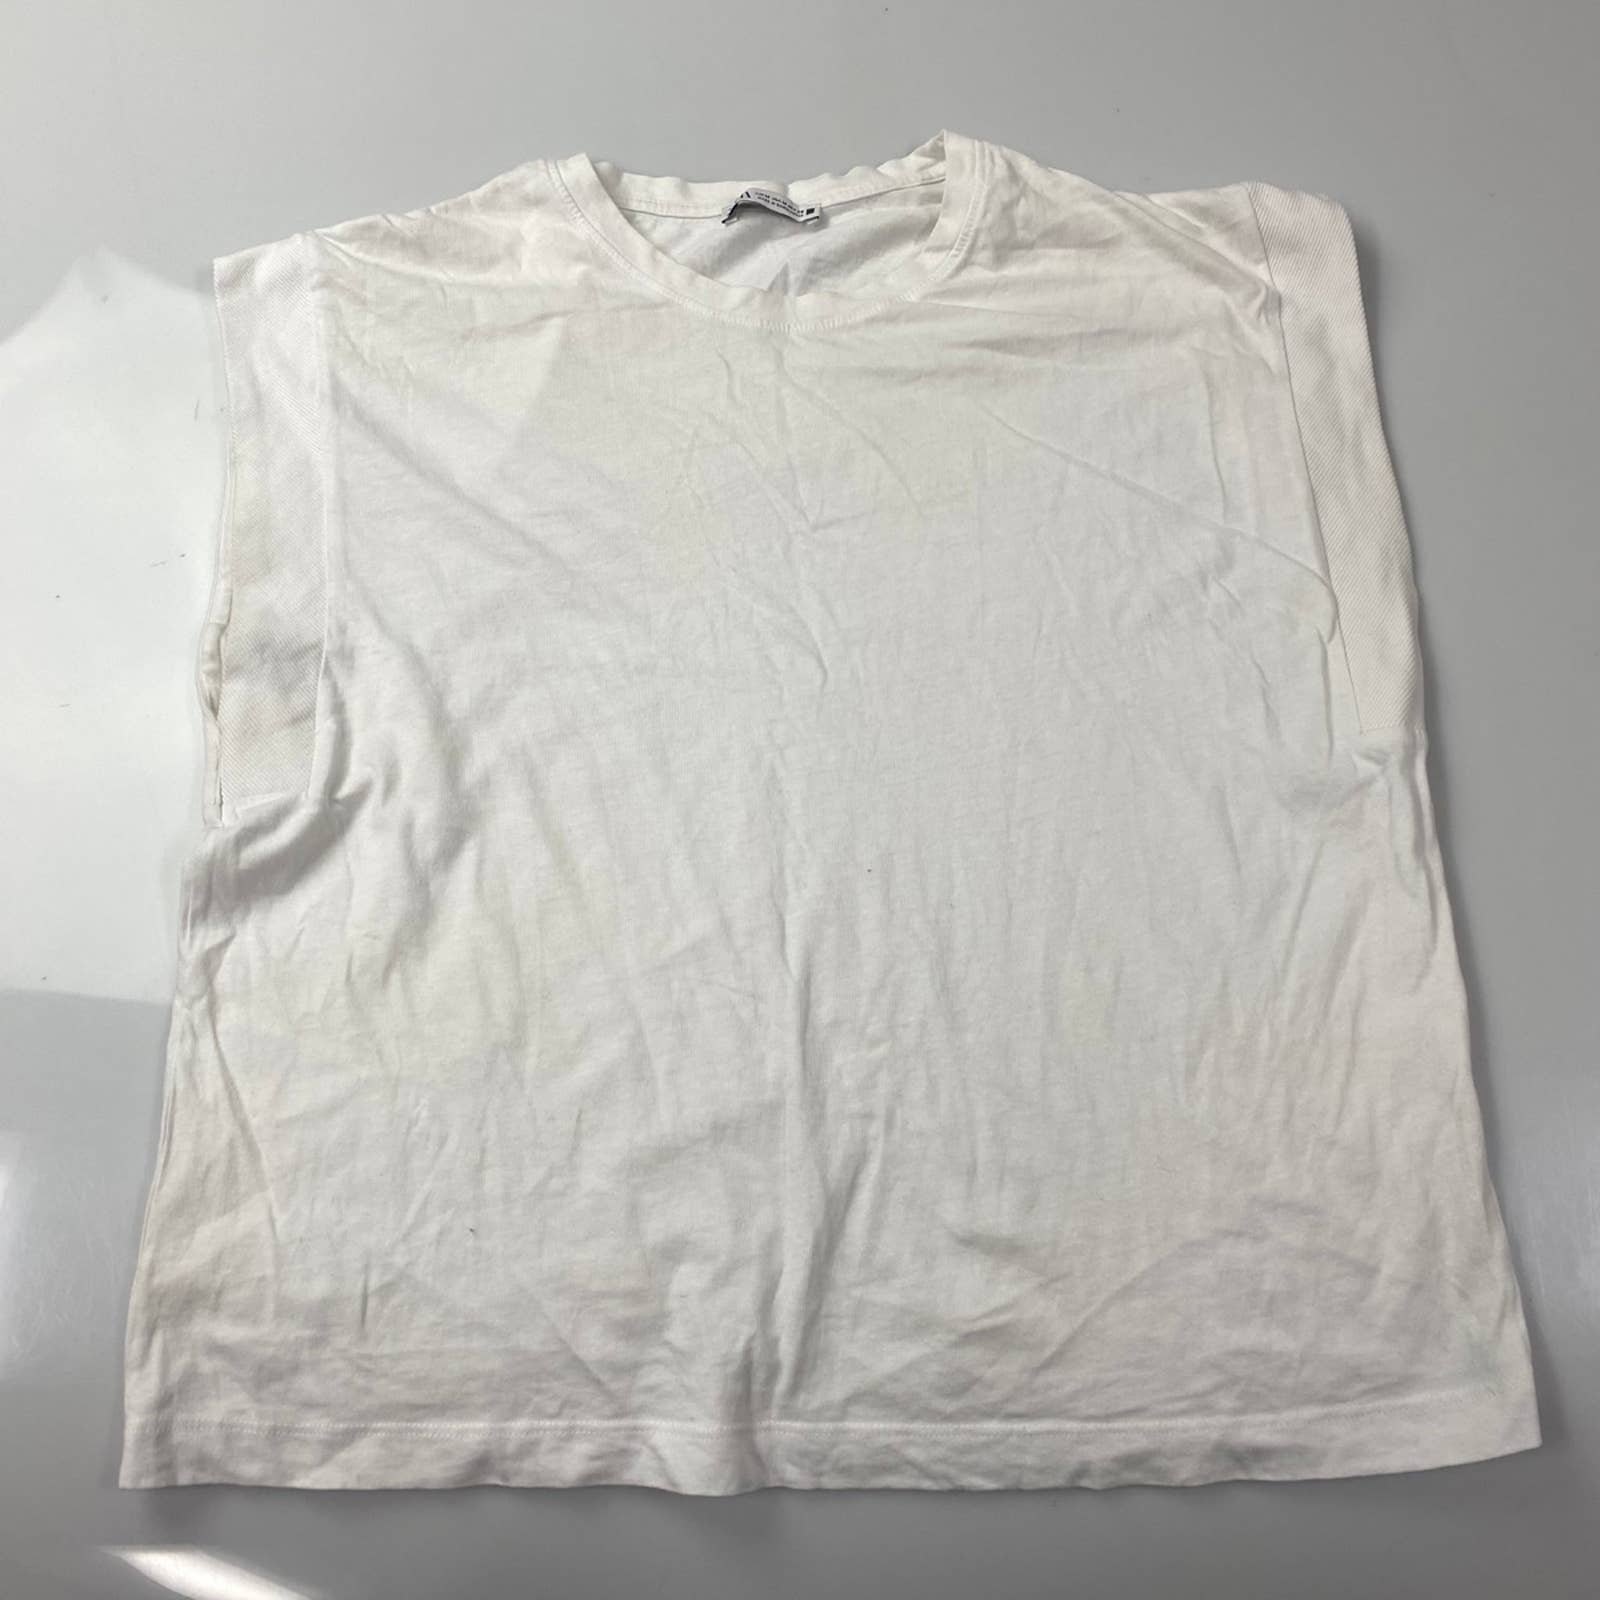 Promotions  ZARA white muscle t-shirt GiOokKC3N Everyday Low Prices